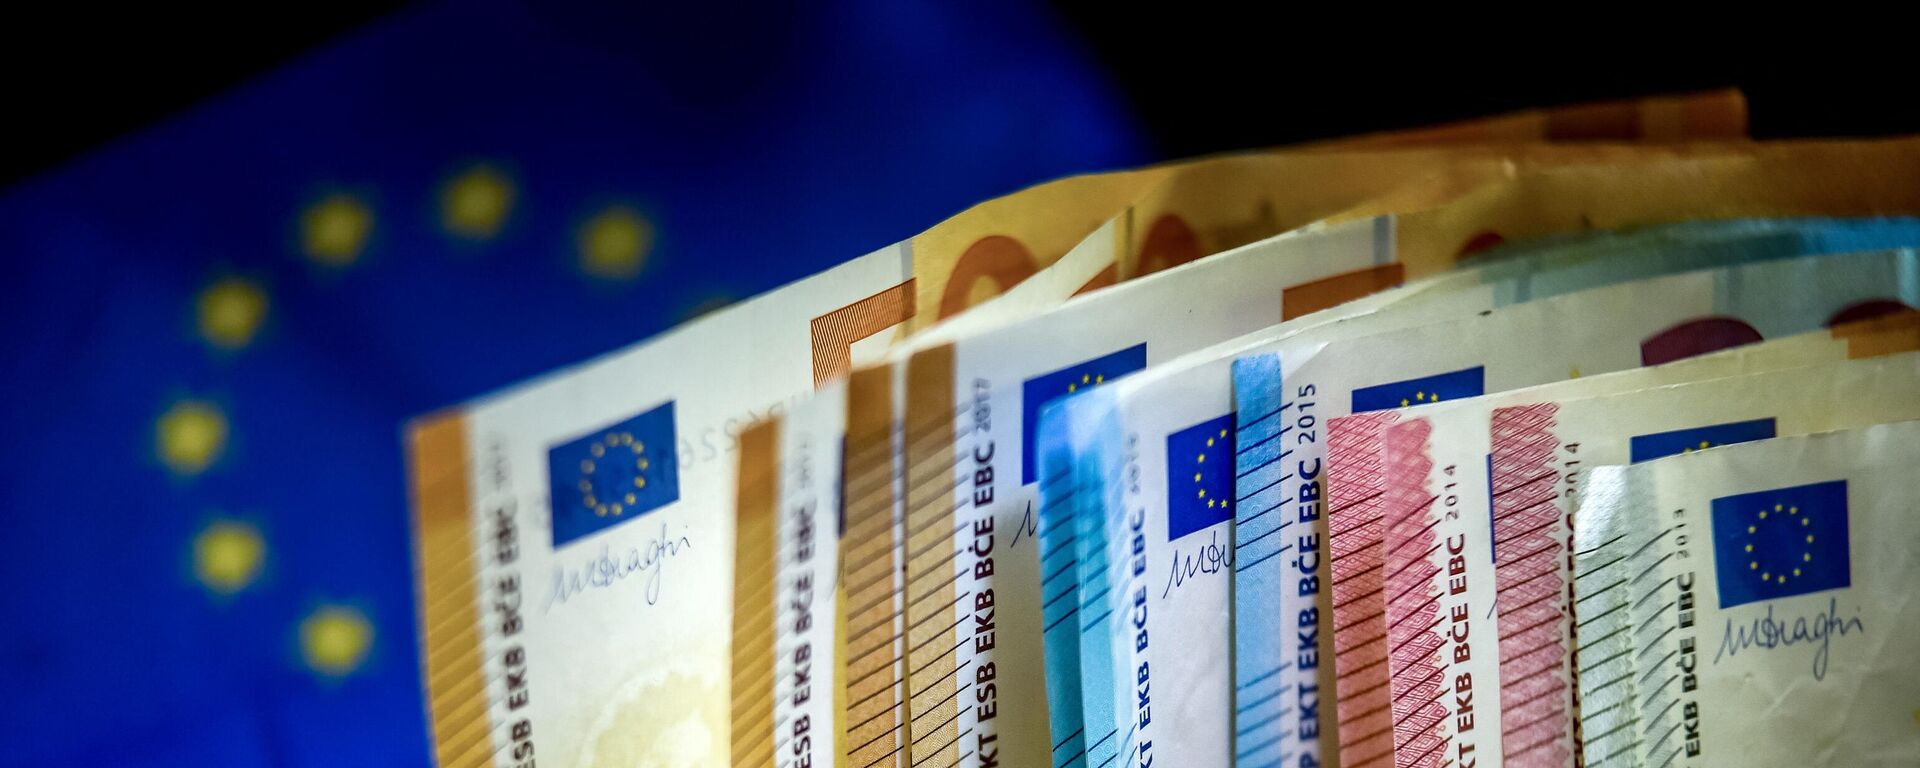 Euro banknotes are displayed next to an European Union flag, in Lille, on March 22, 2019. - Sputnik International, 1920, 29.12.2023